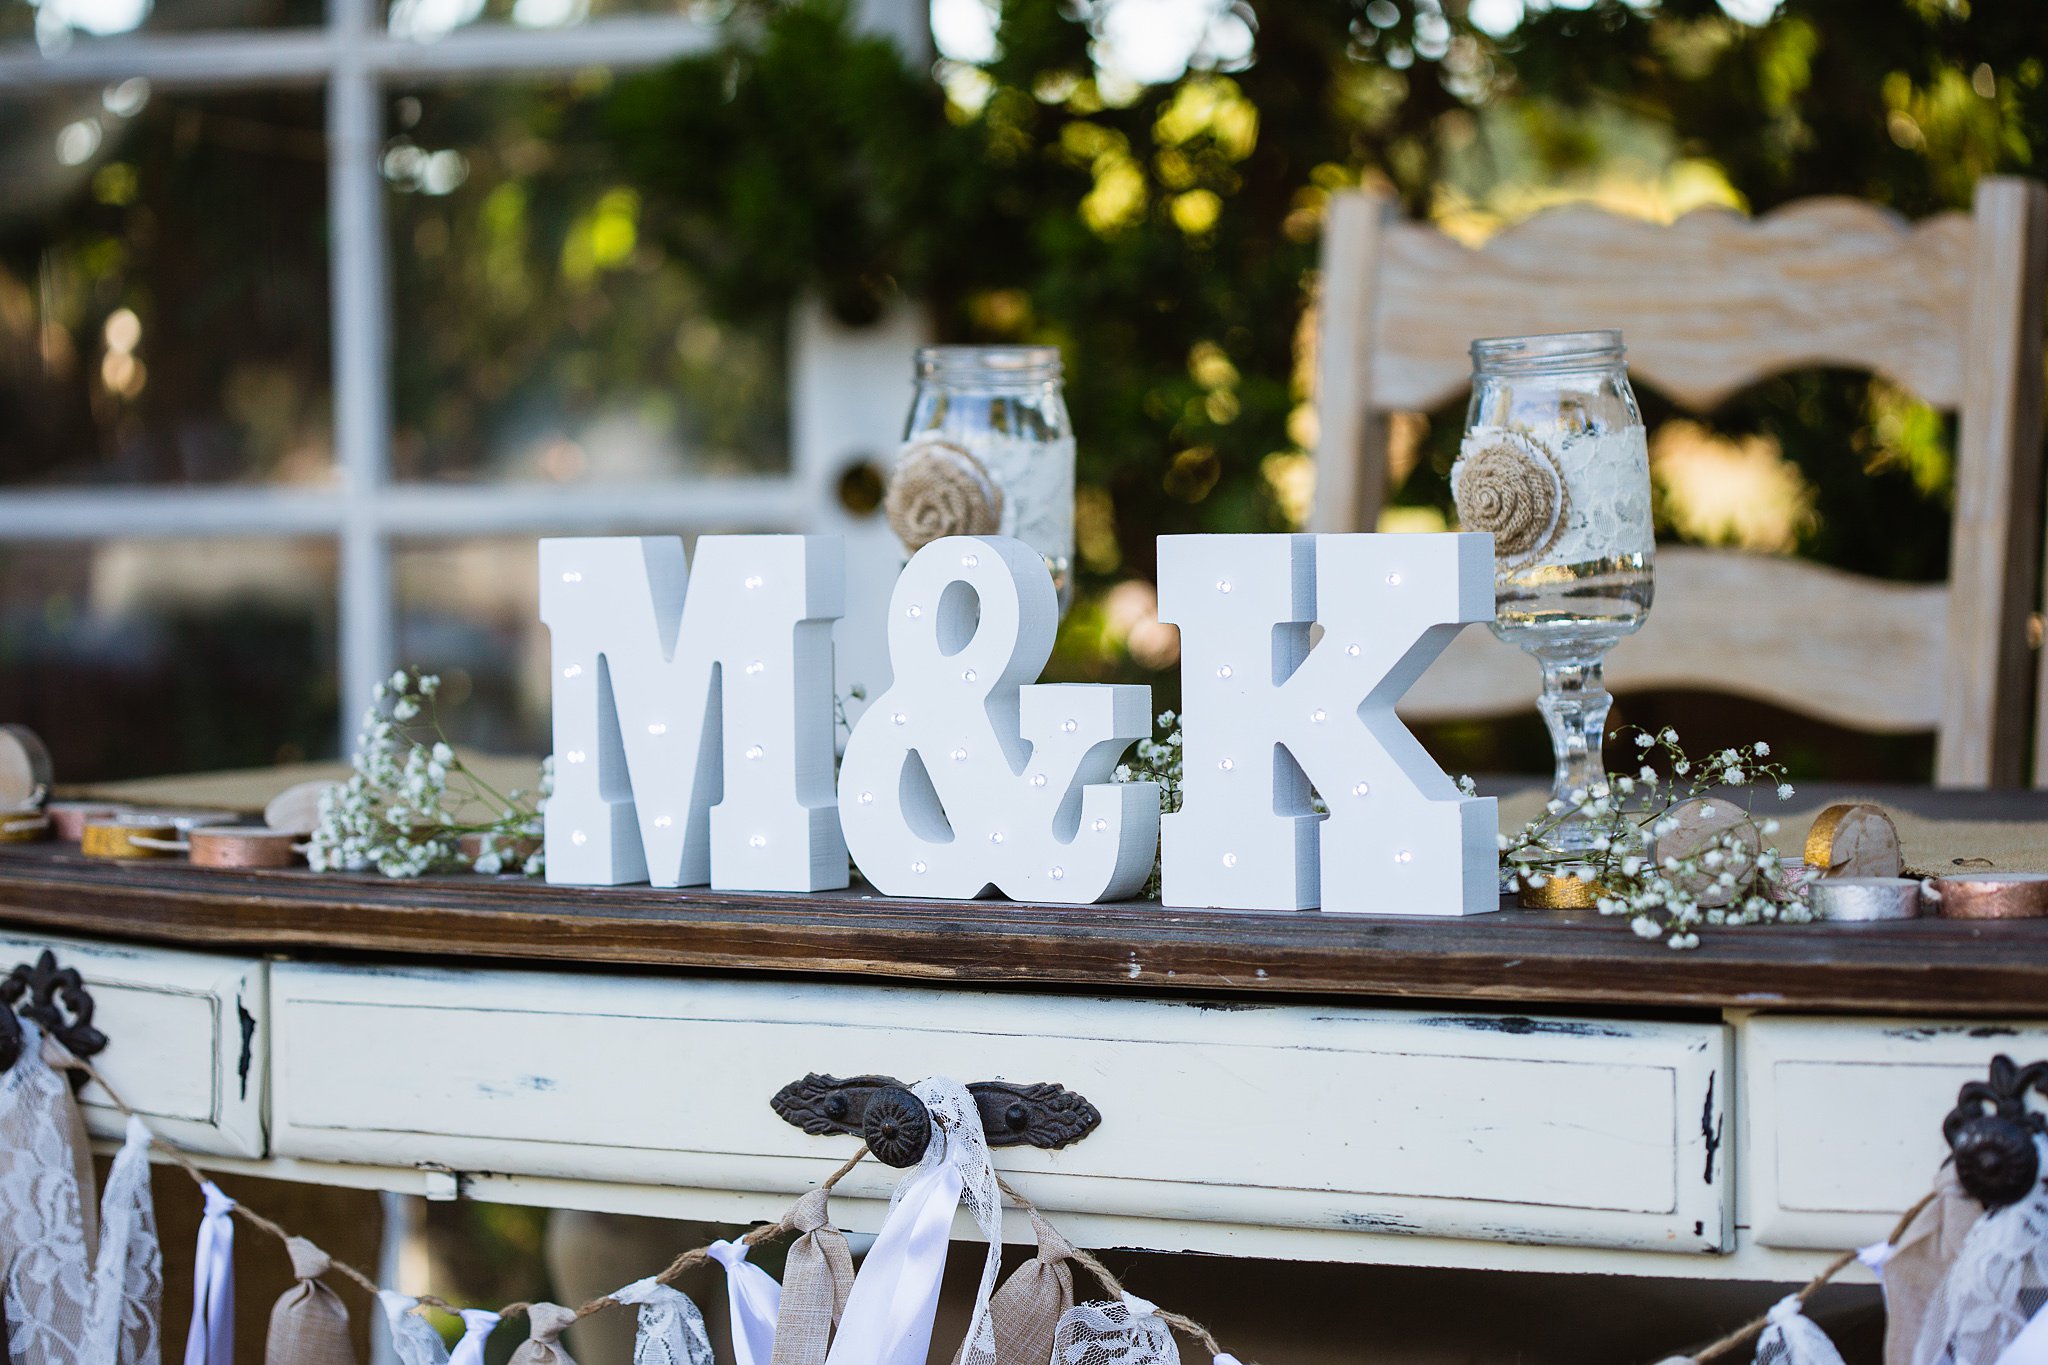 Rustic chic sweetheart table decorations at Schnepf Farms wedding reception by Phoenix photographer PMA Photography.